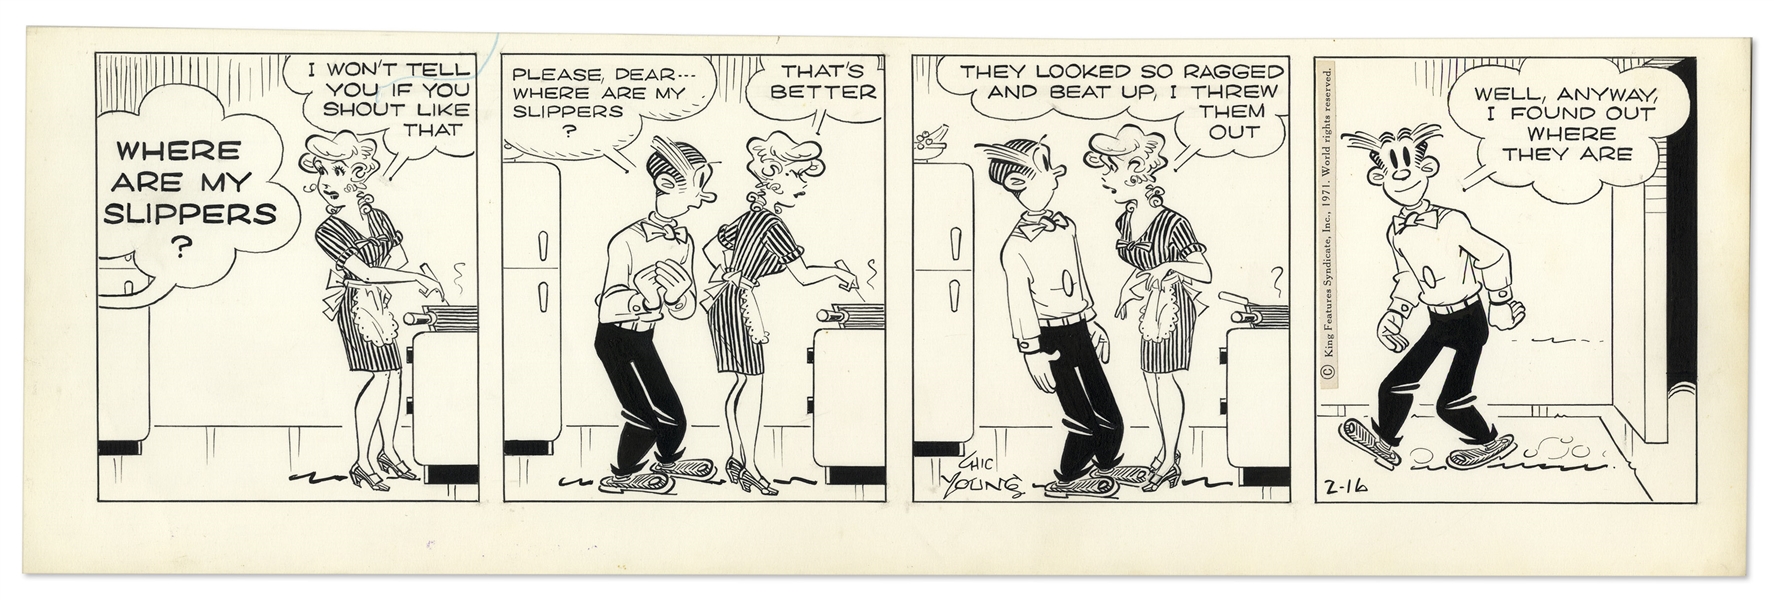 2 Chic Young Hand-Drawn ''Blondie'' Comic Strips From 1970 & 1971 -- With Chic Young's Original Artwork for Both